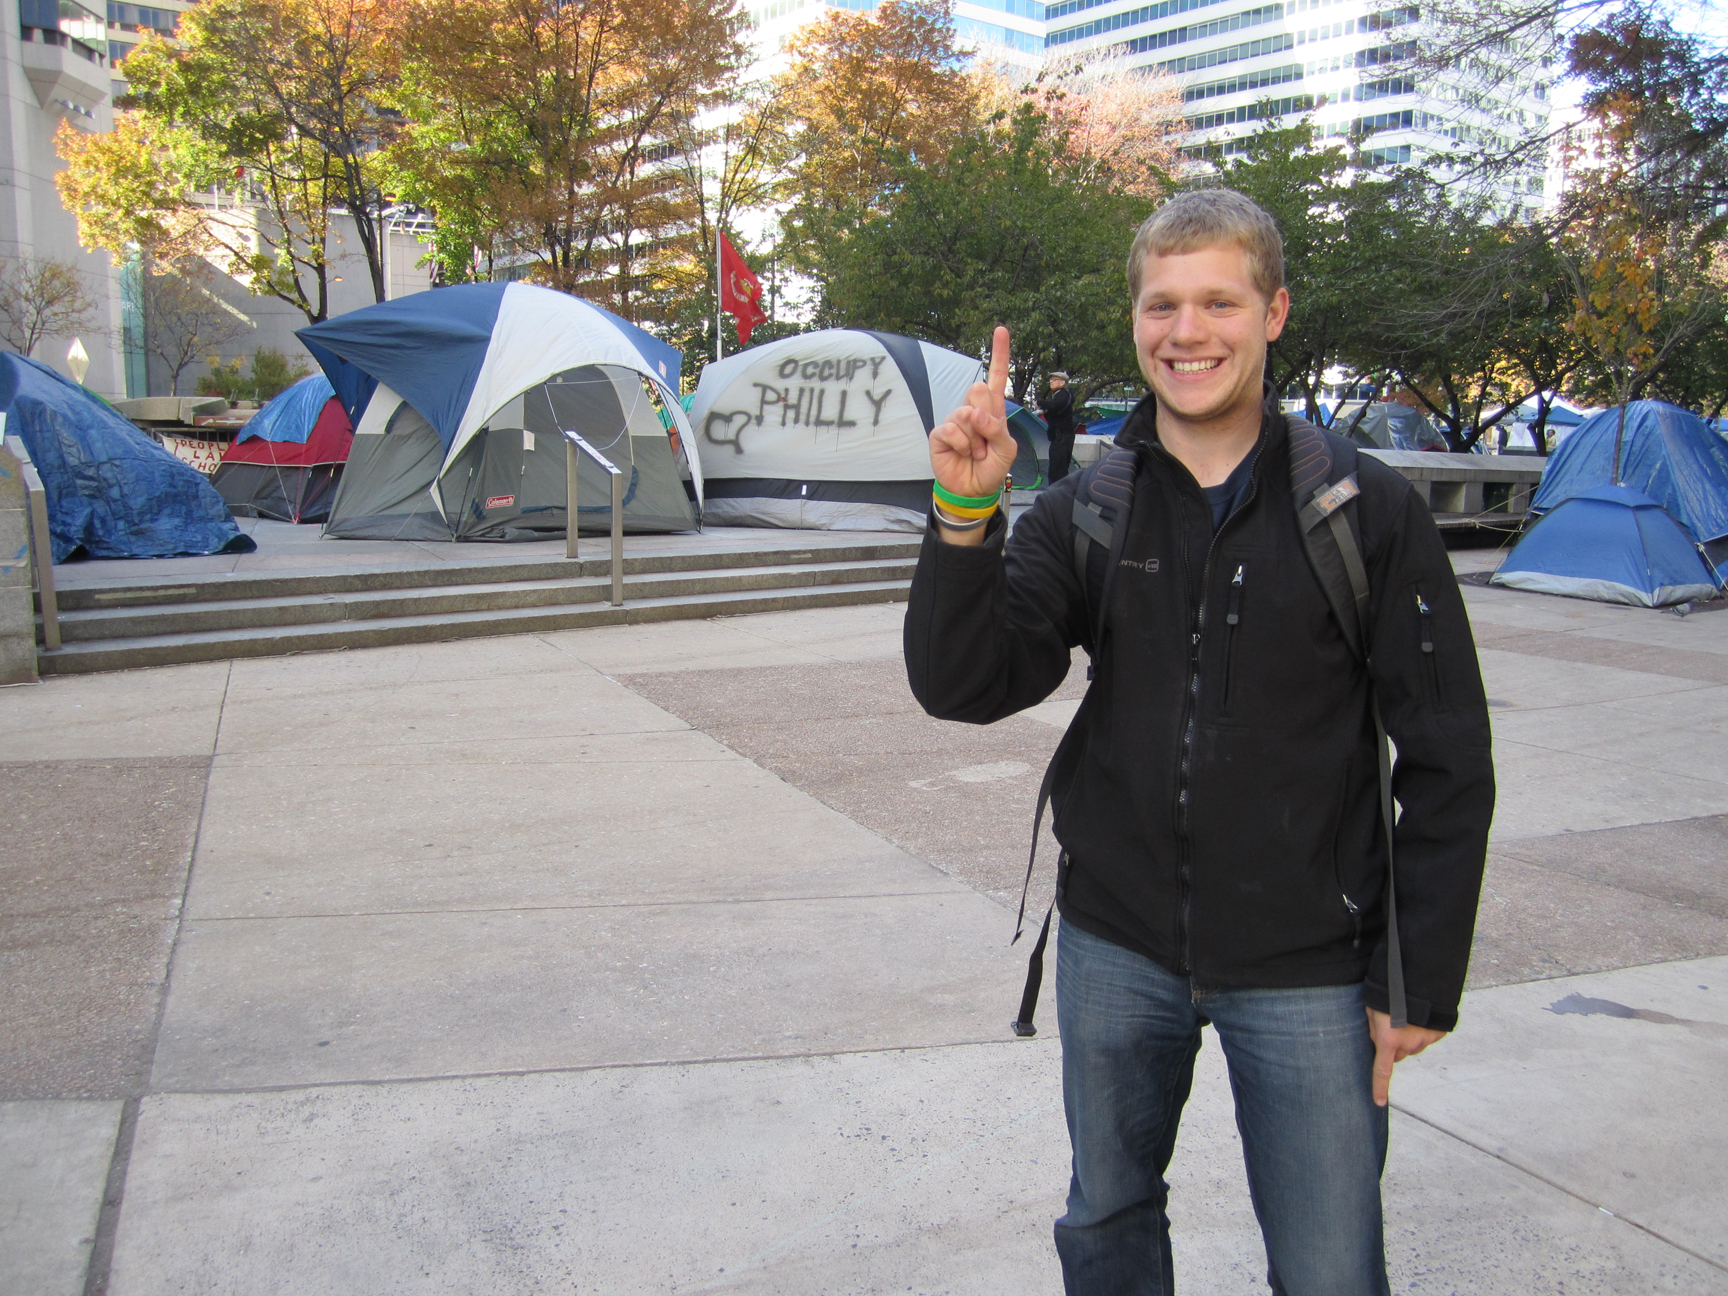  Greg Smith in front of Occupy Philly
Fall 2011 